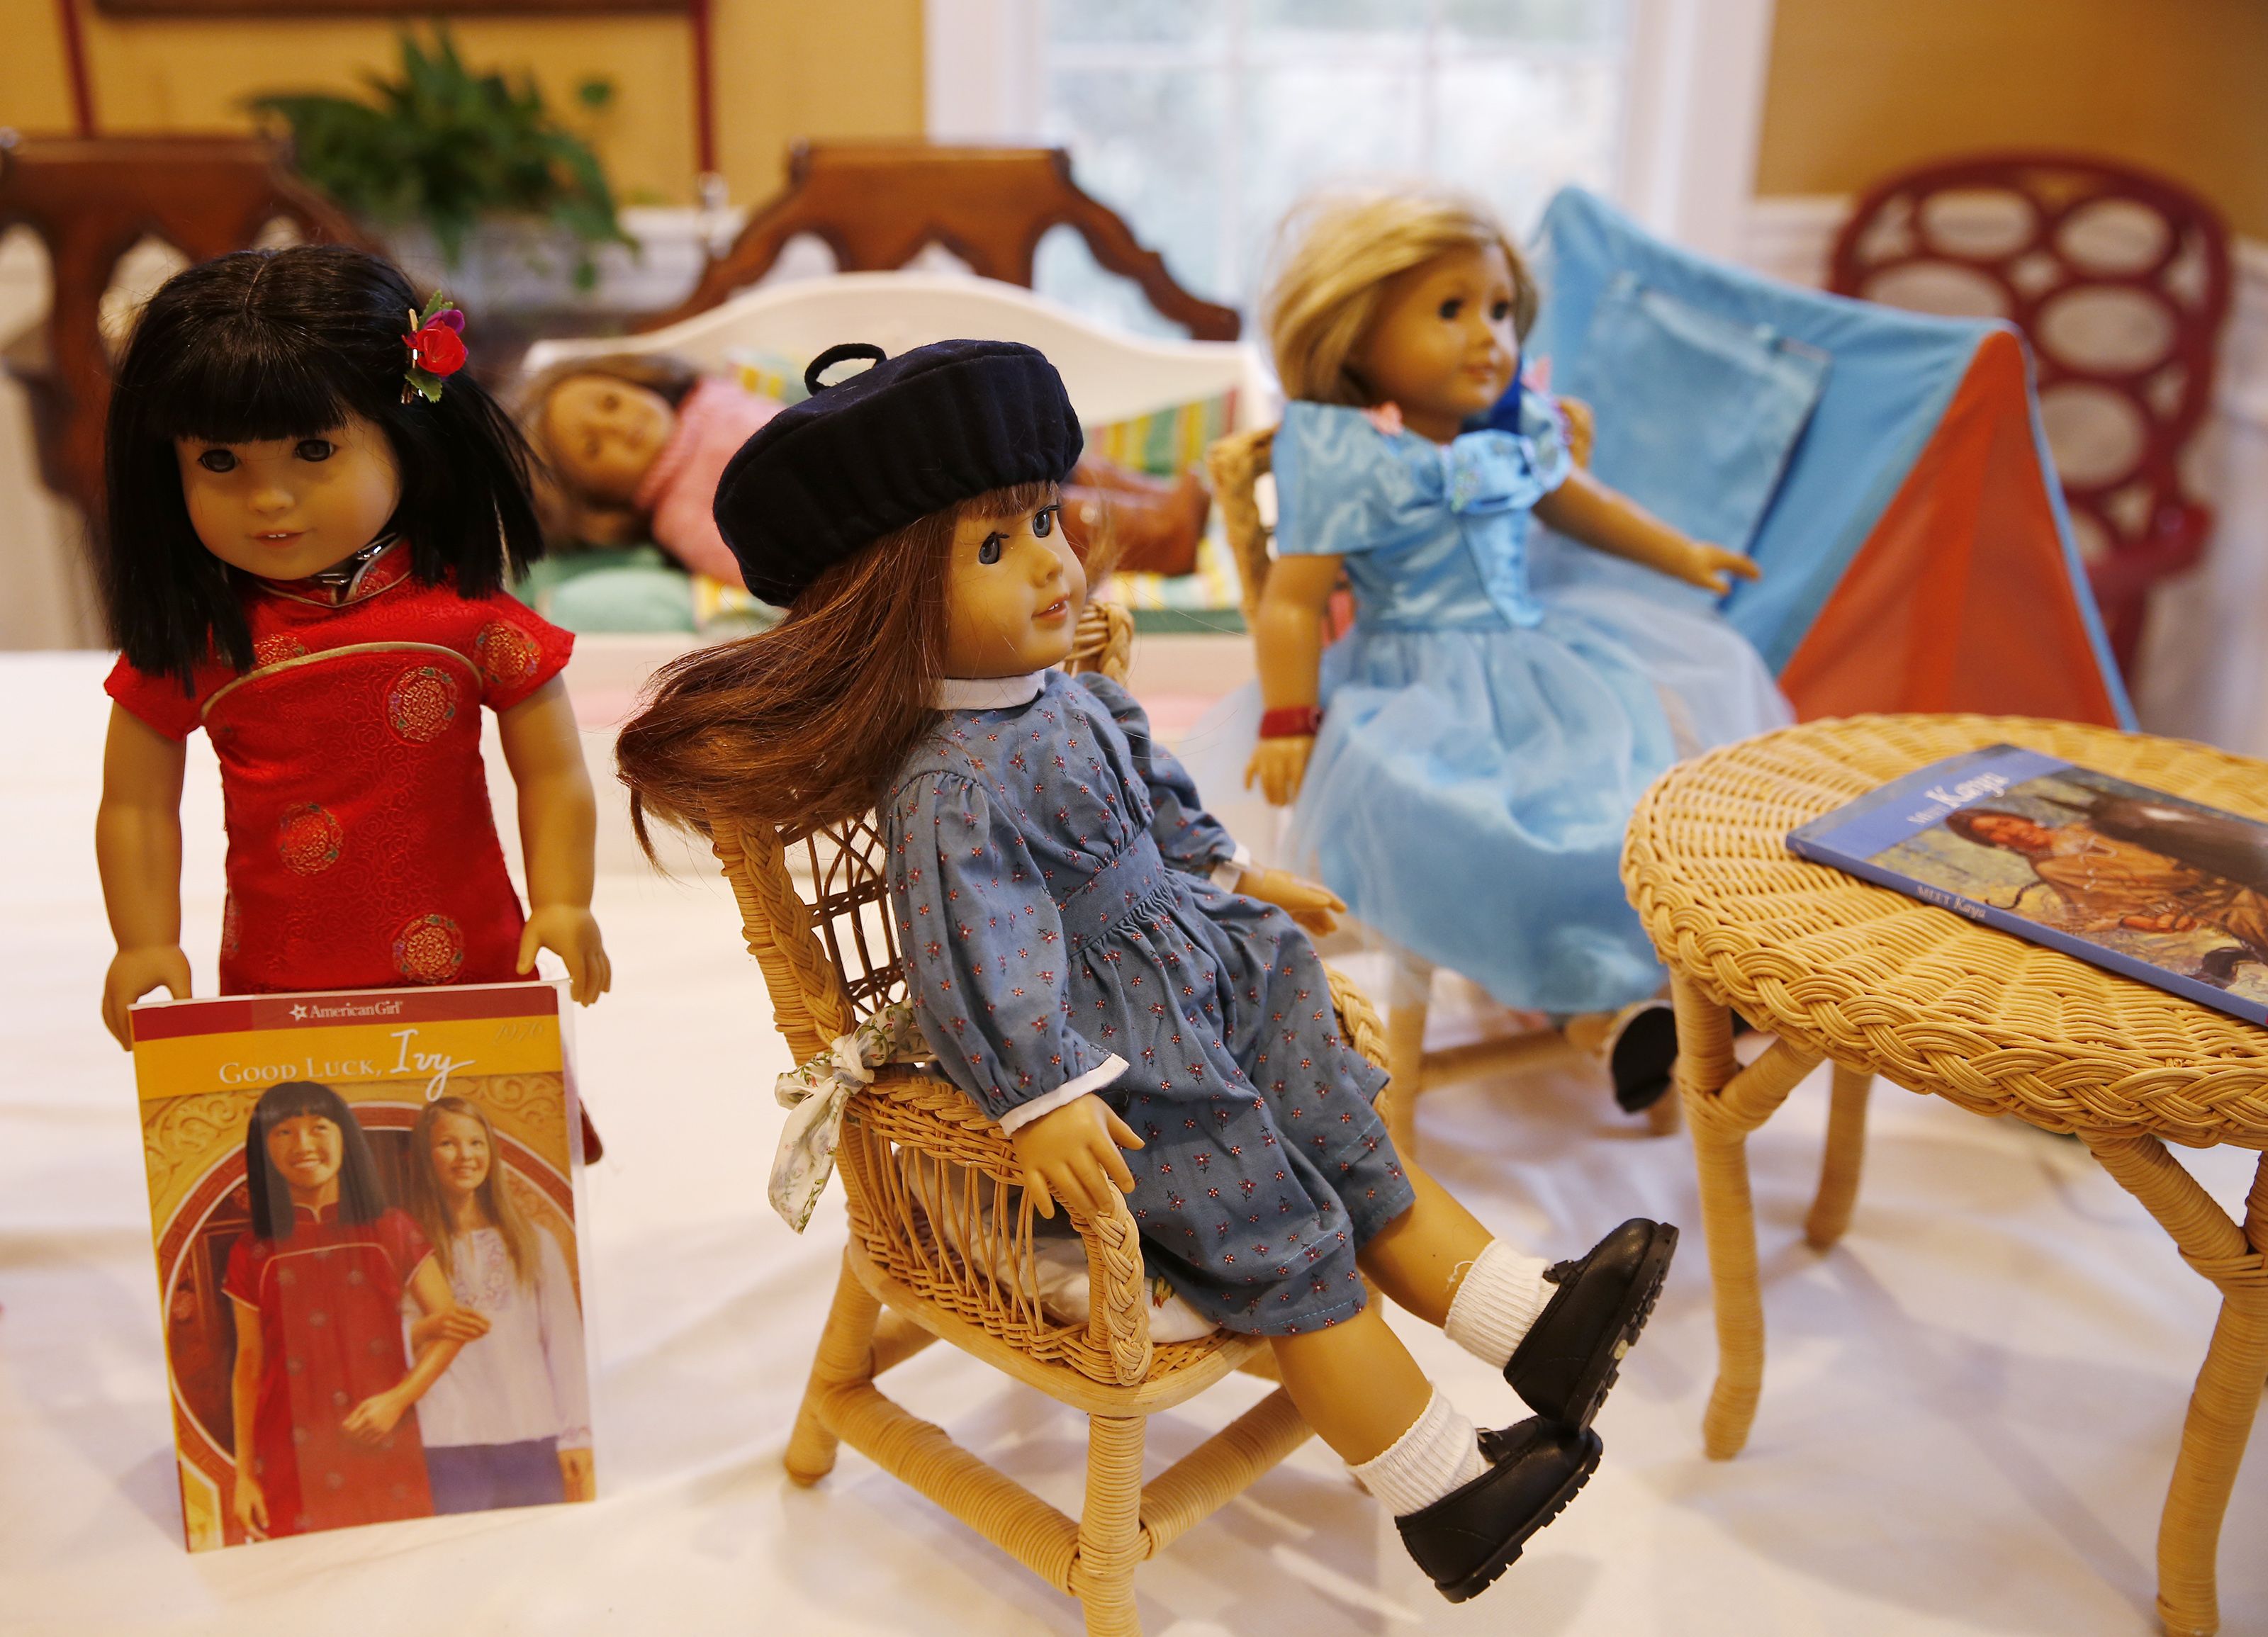 This 11-Year-Old American Girl Fan Has More Than 30 Dolls - ABC News